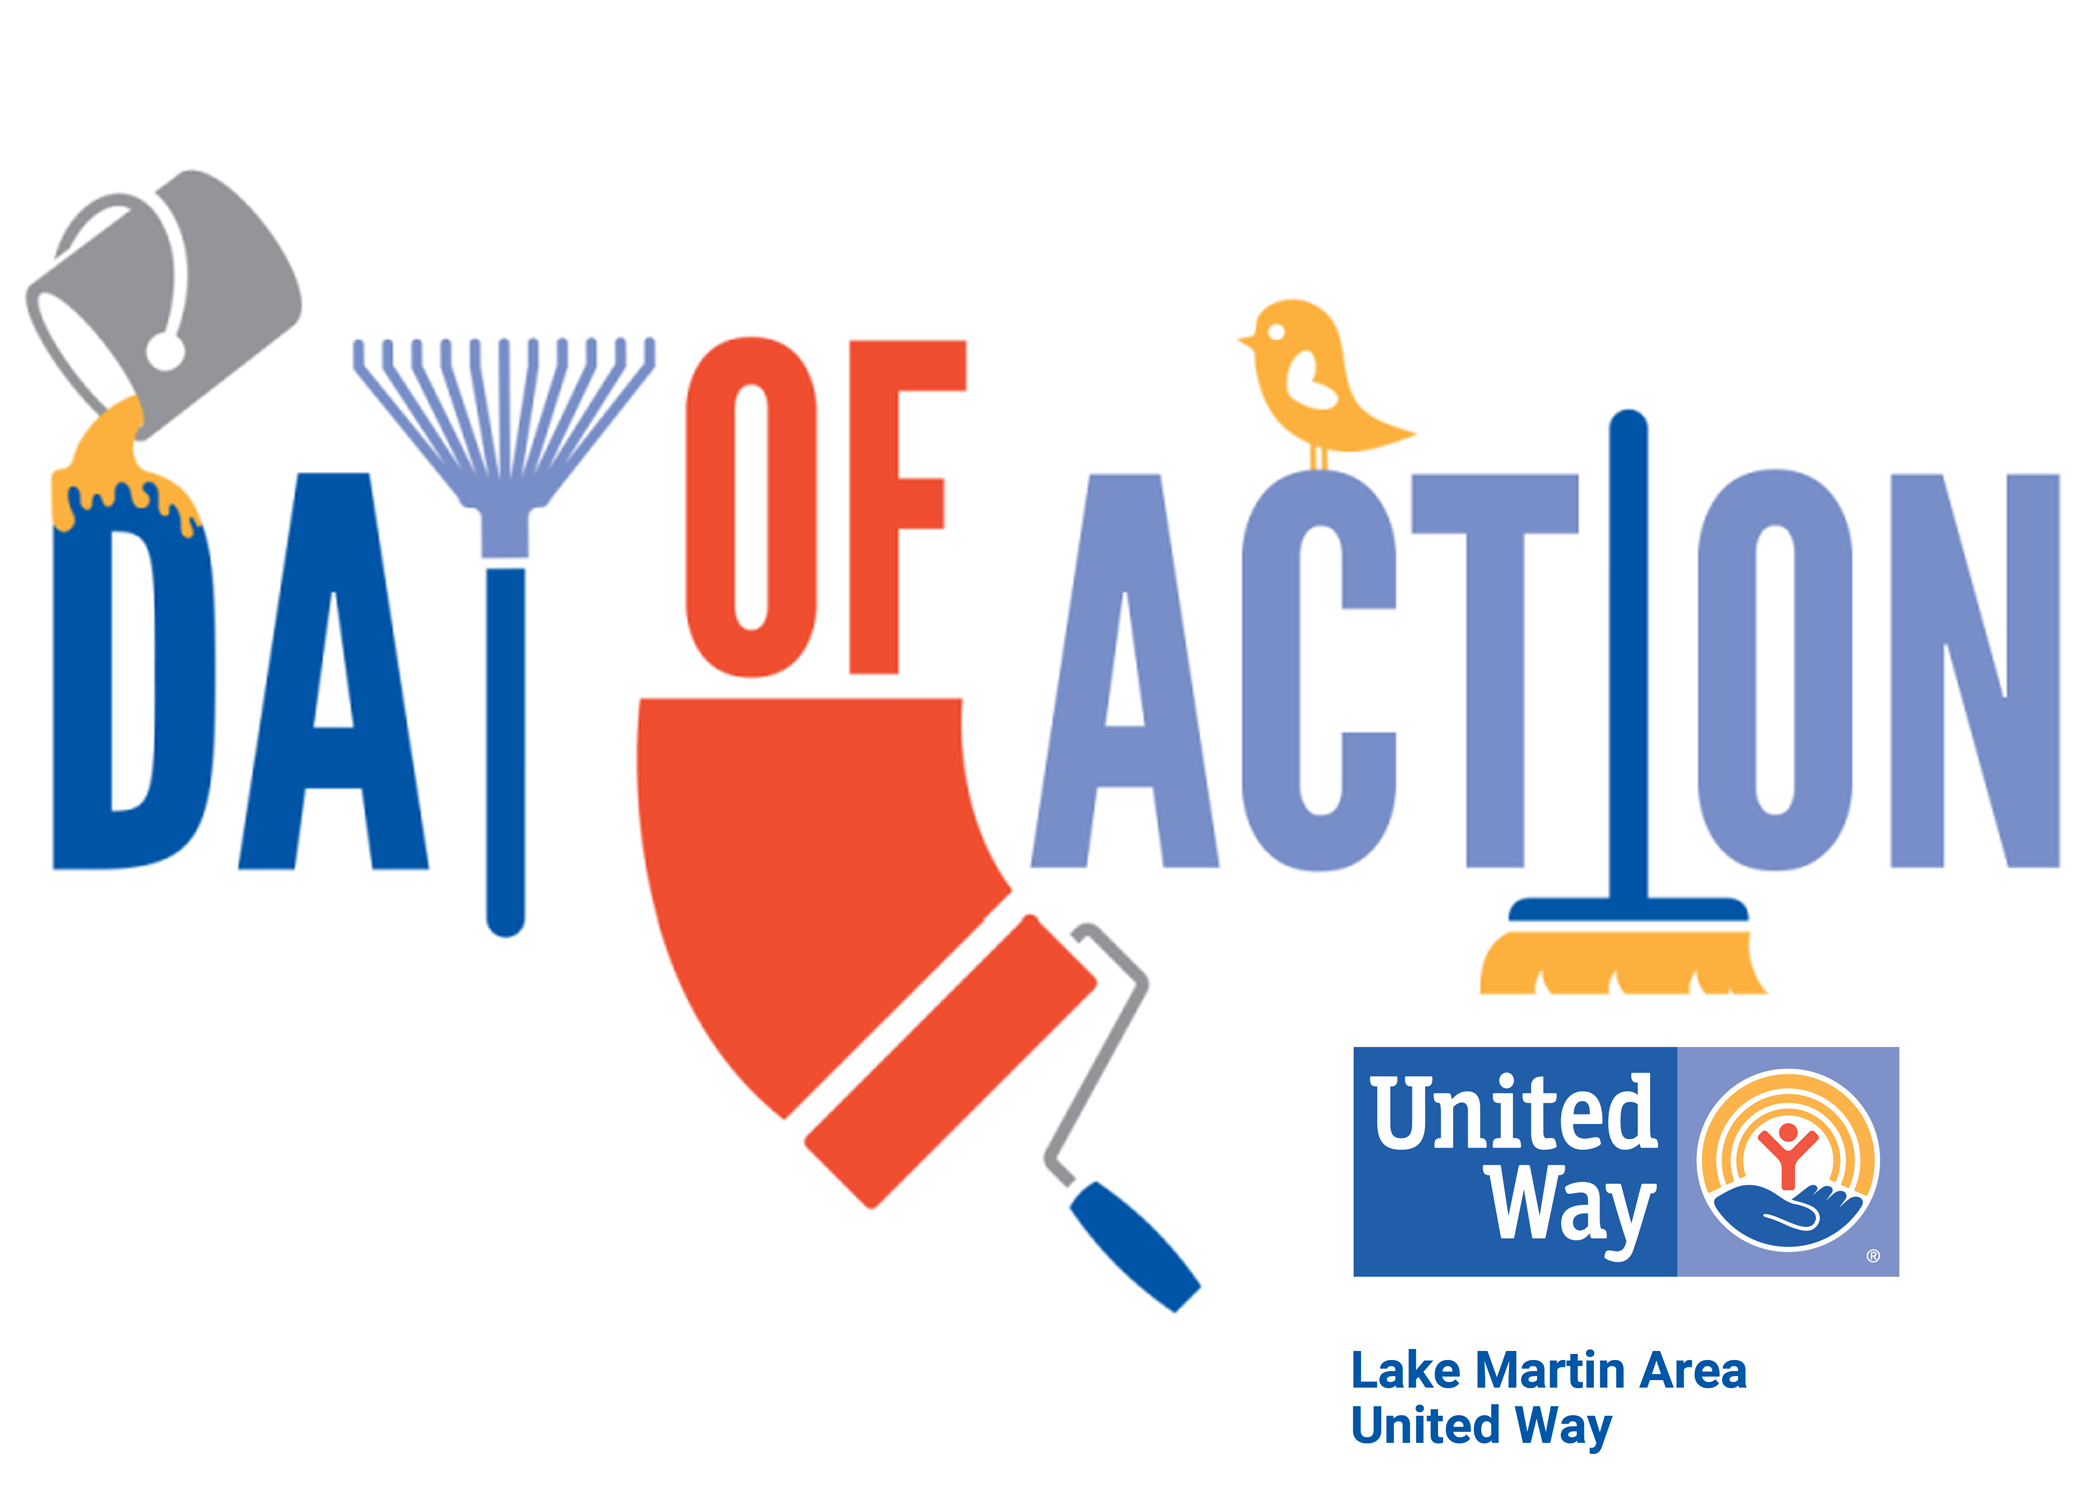 Day of Action Logo